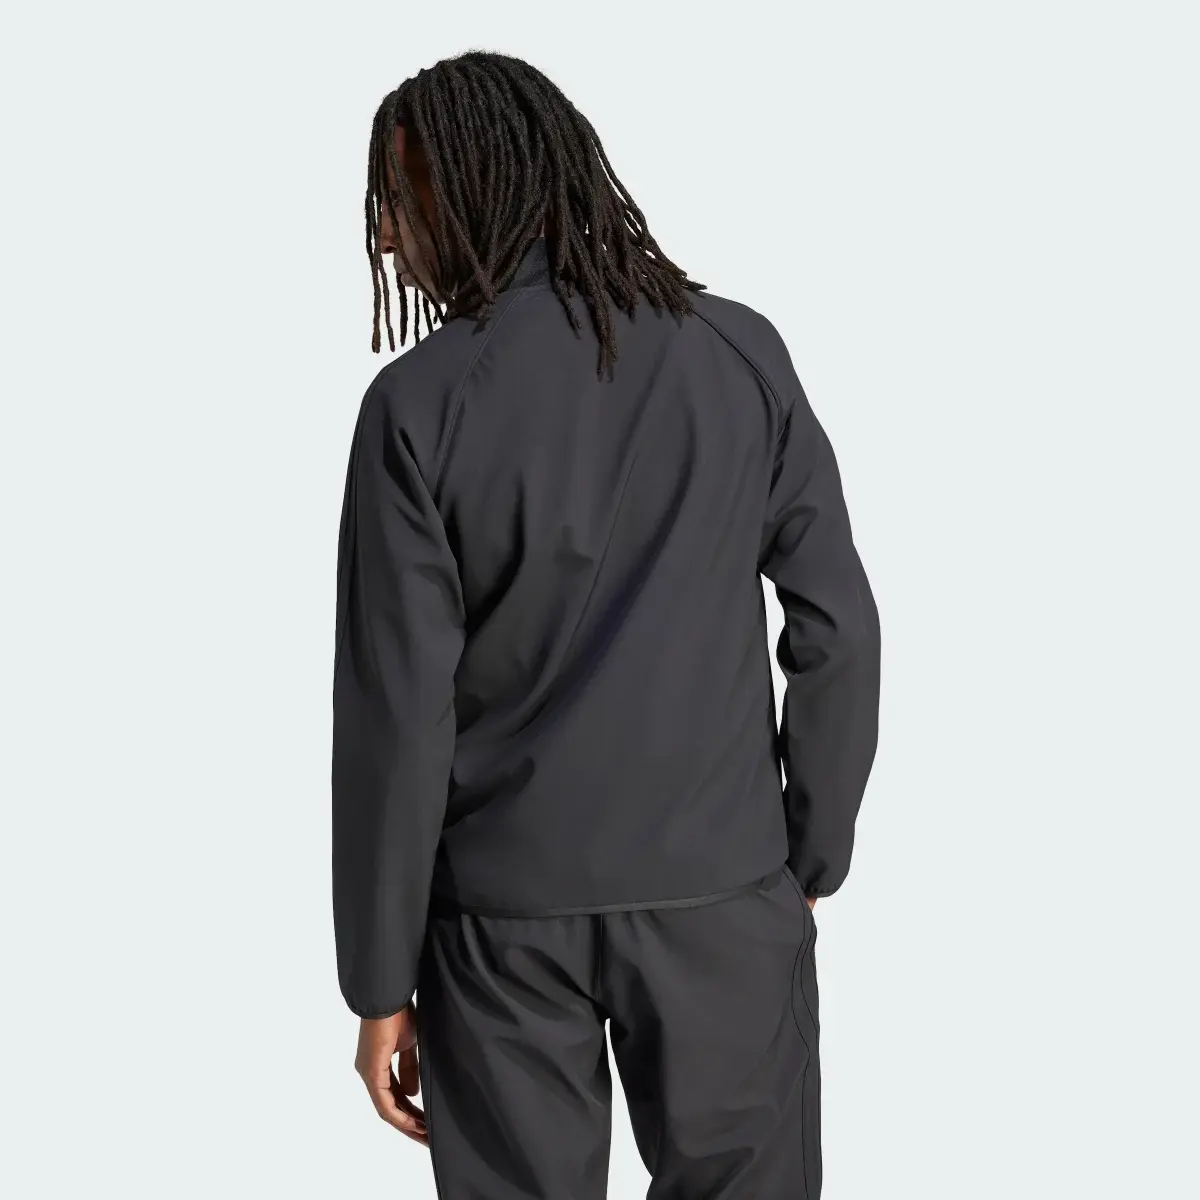 Adidas SST Bonded Track Top. 3